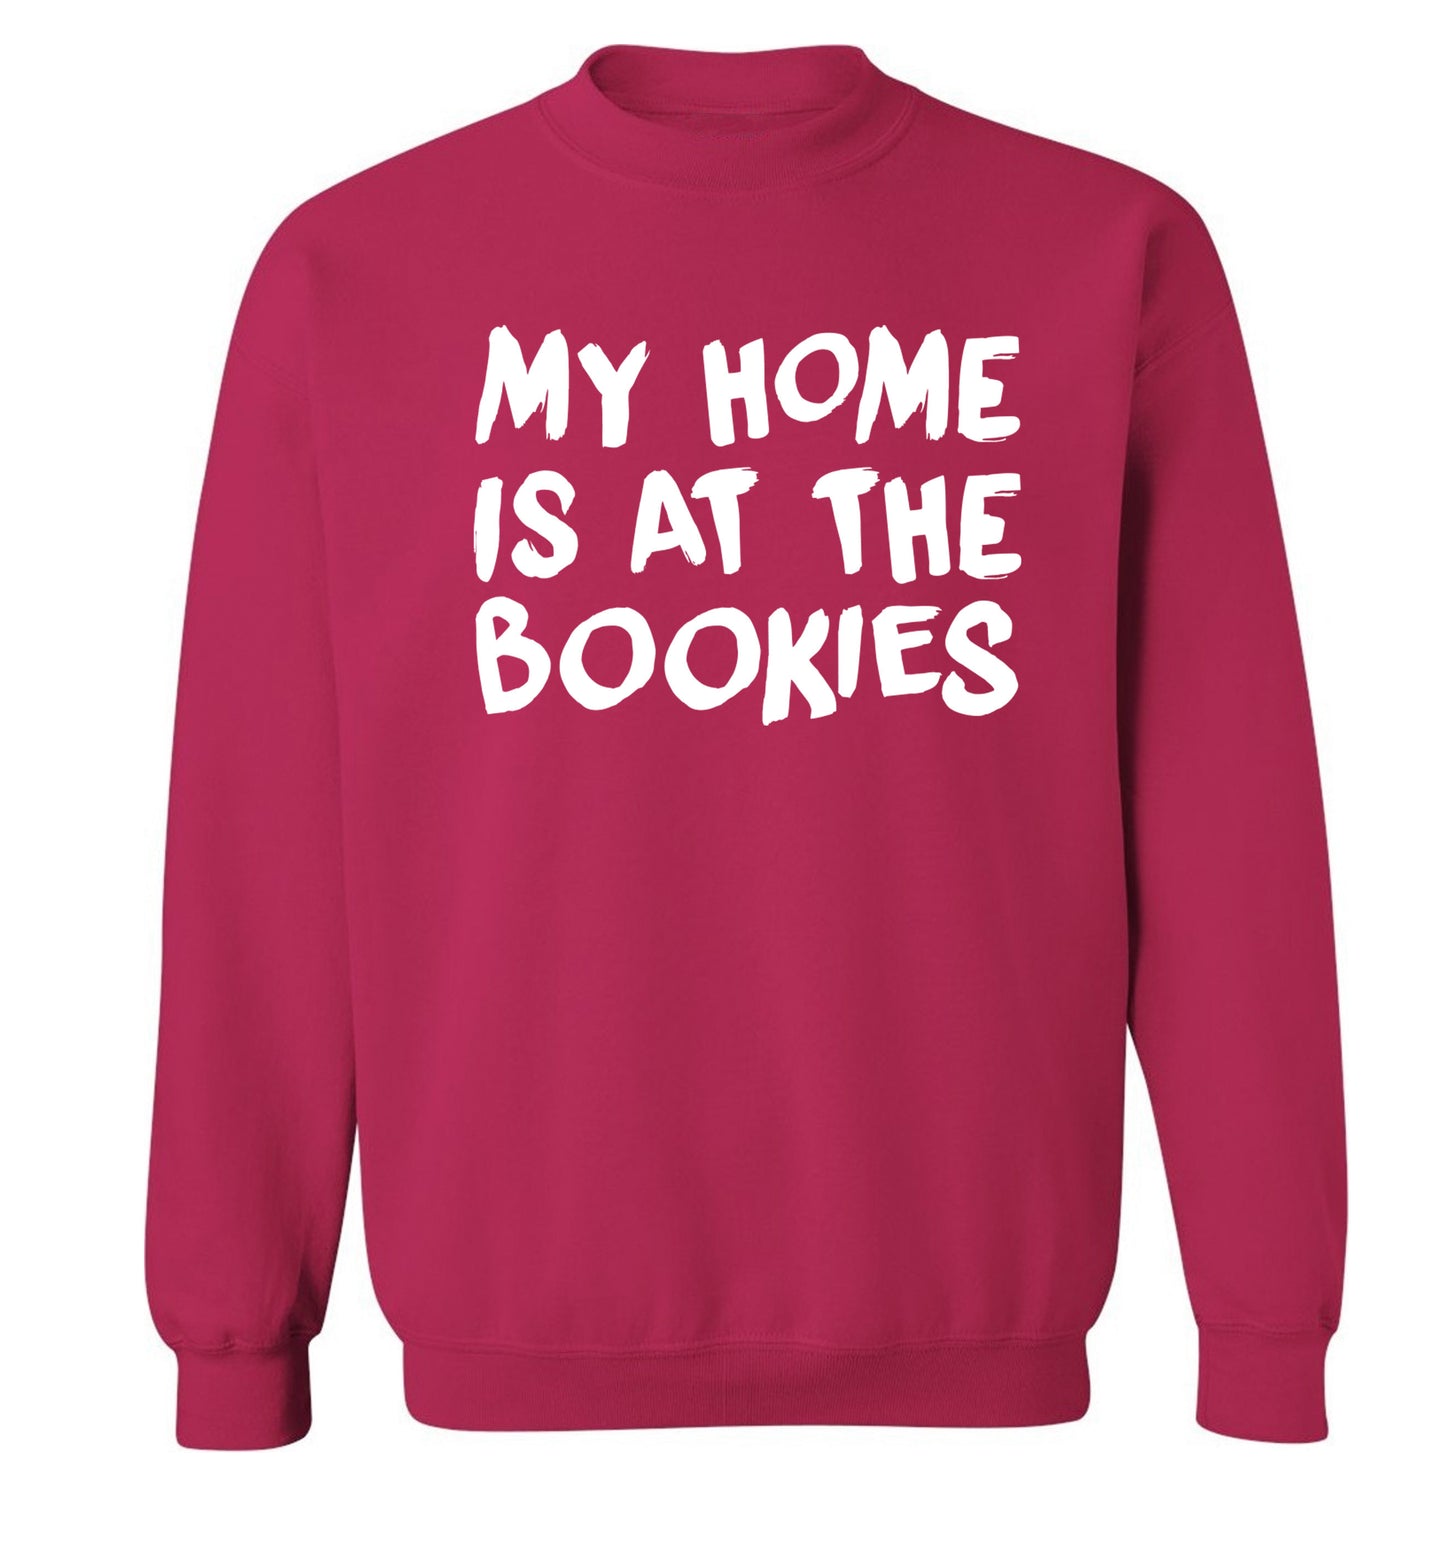 My home is at the bookies Adult's unisex pink Sweater 2XL